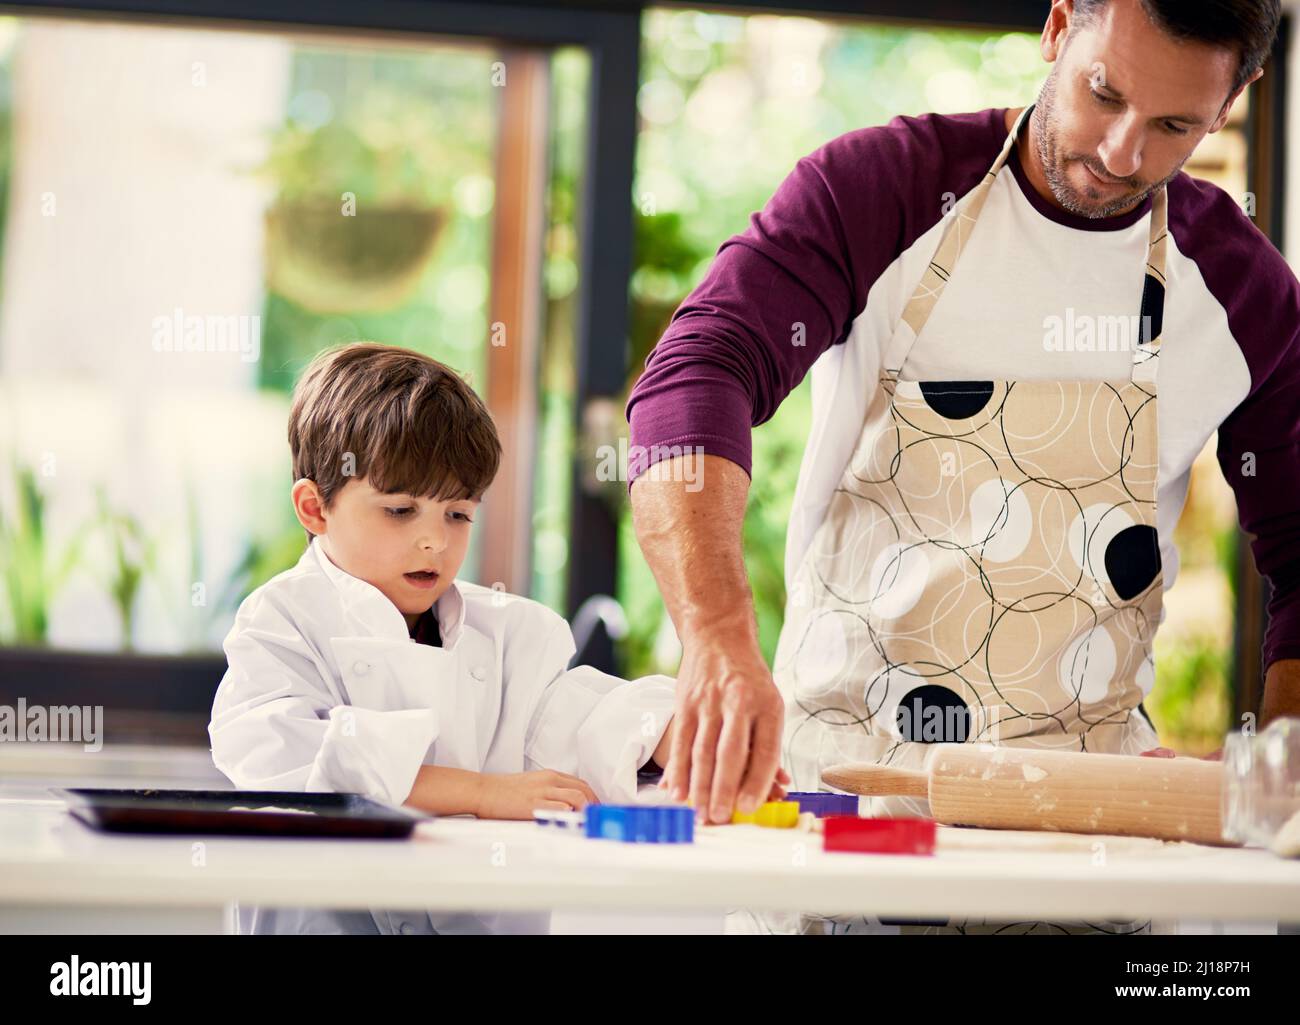 Cookies are made of butter and love. Shot of a father and son baking biscuits in the kitchen. Stock Photo